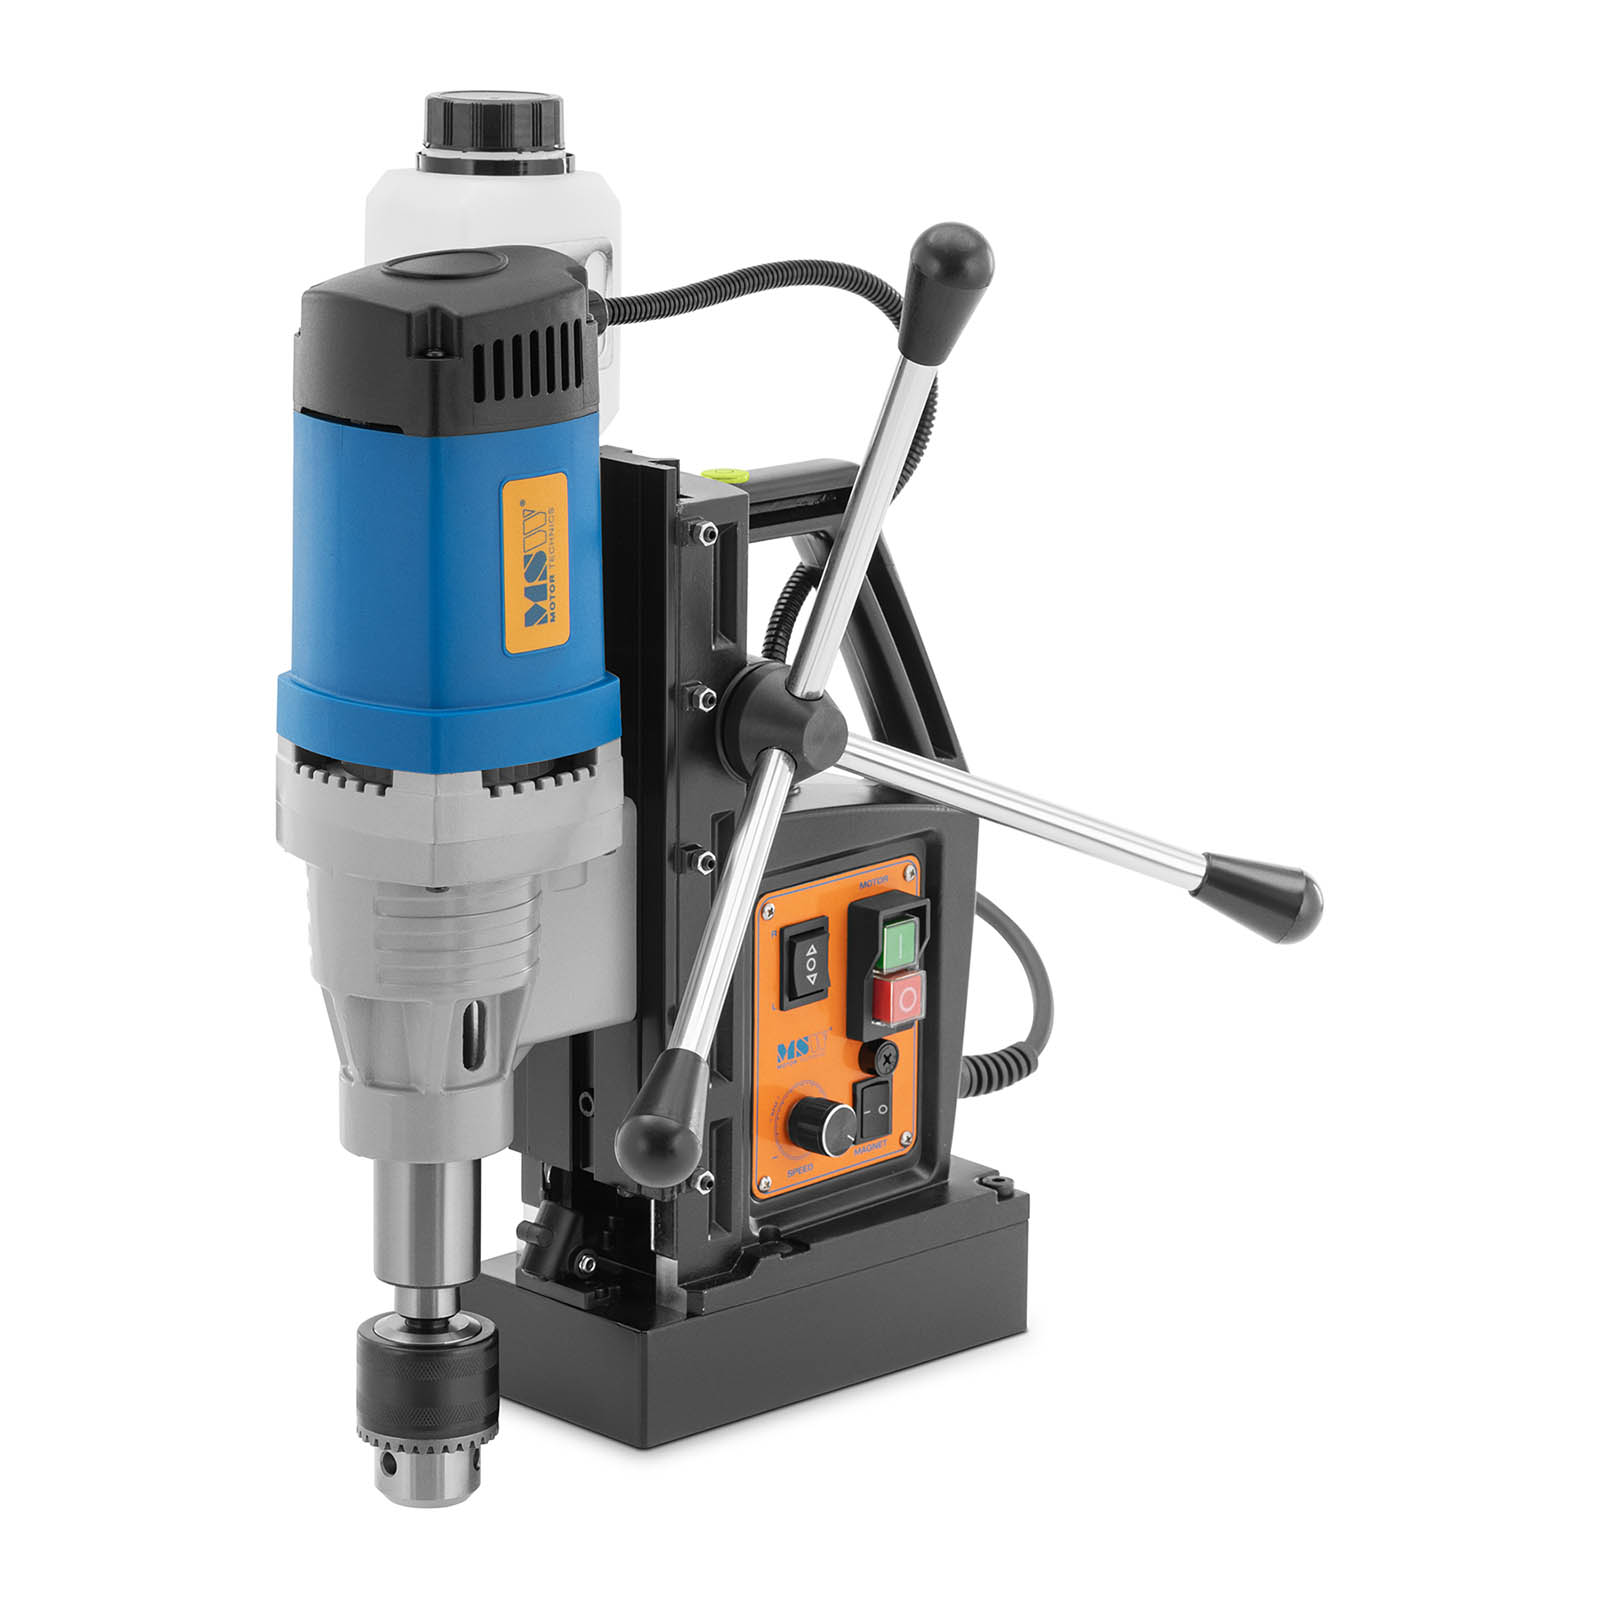 Magnetic drill - 1680 W - 395 rpm - laser